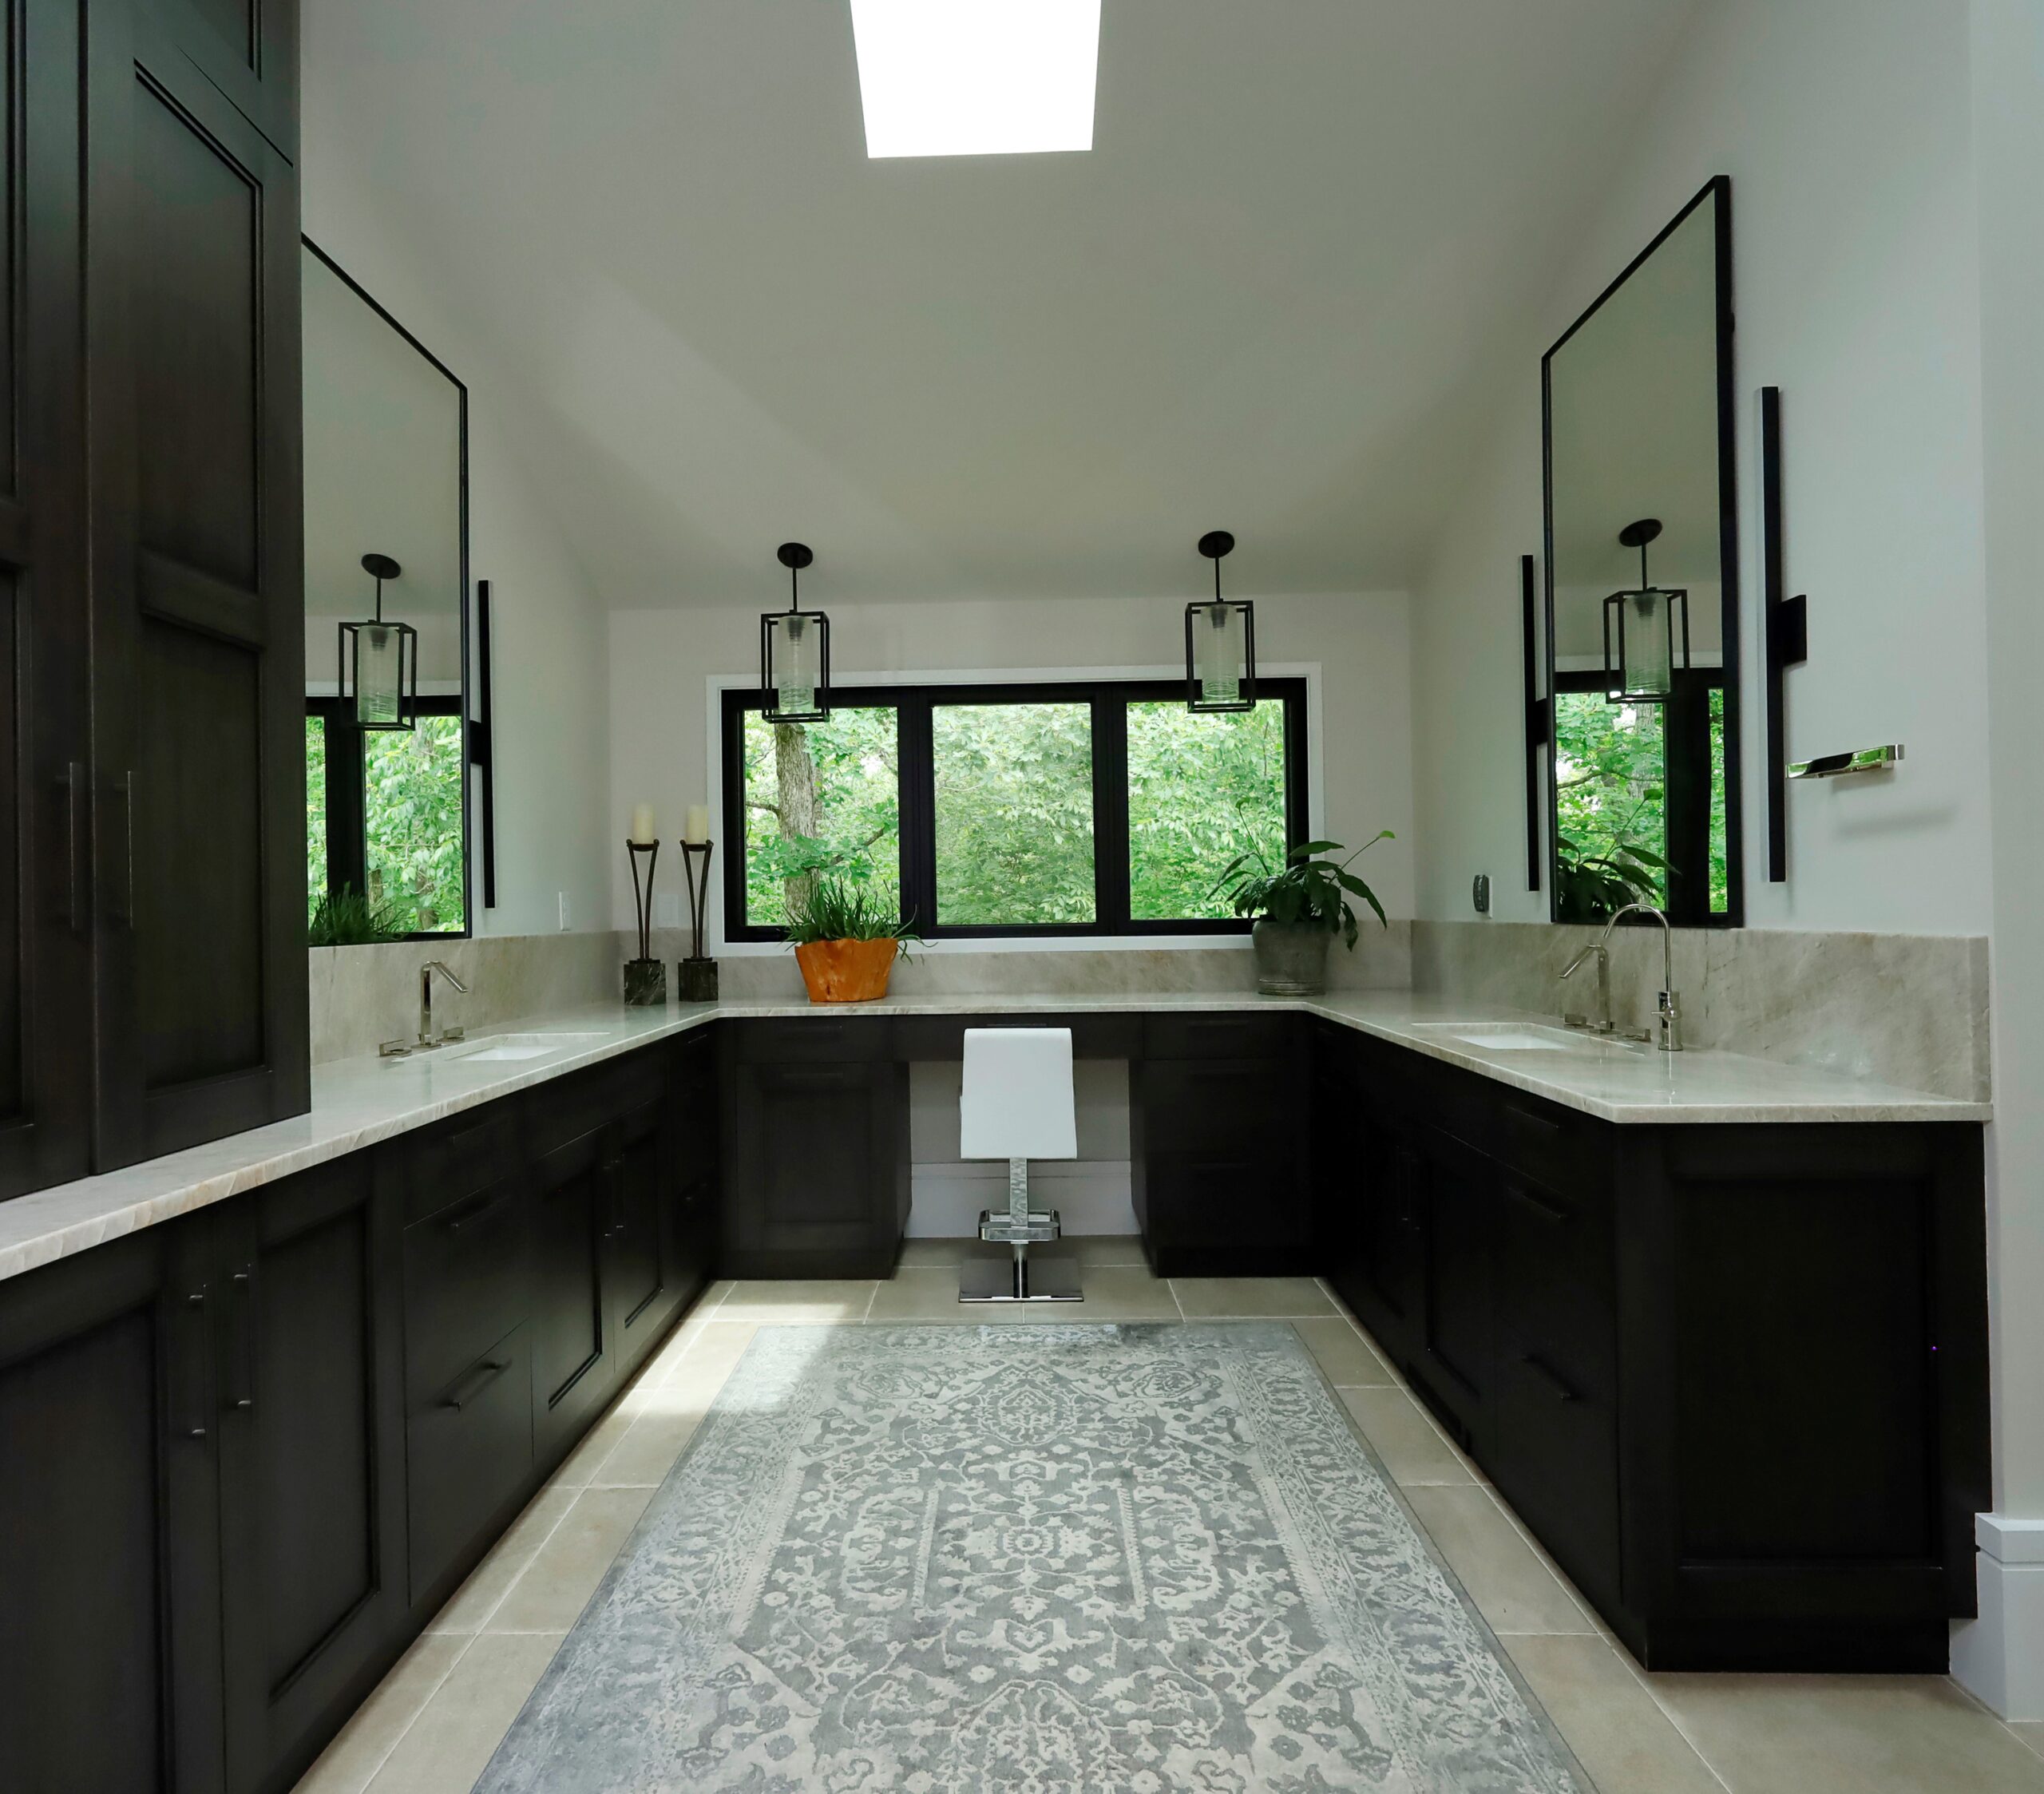 Large windows and skylights illuminate the primary bathroom fitted with double vanities and custom dark wood cabinetry.